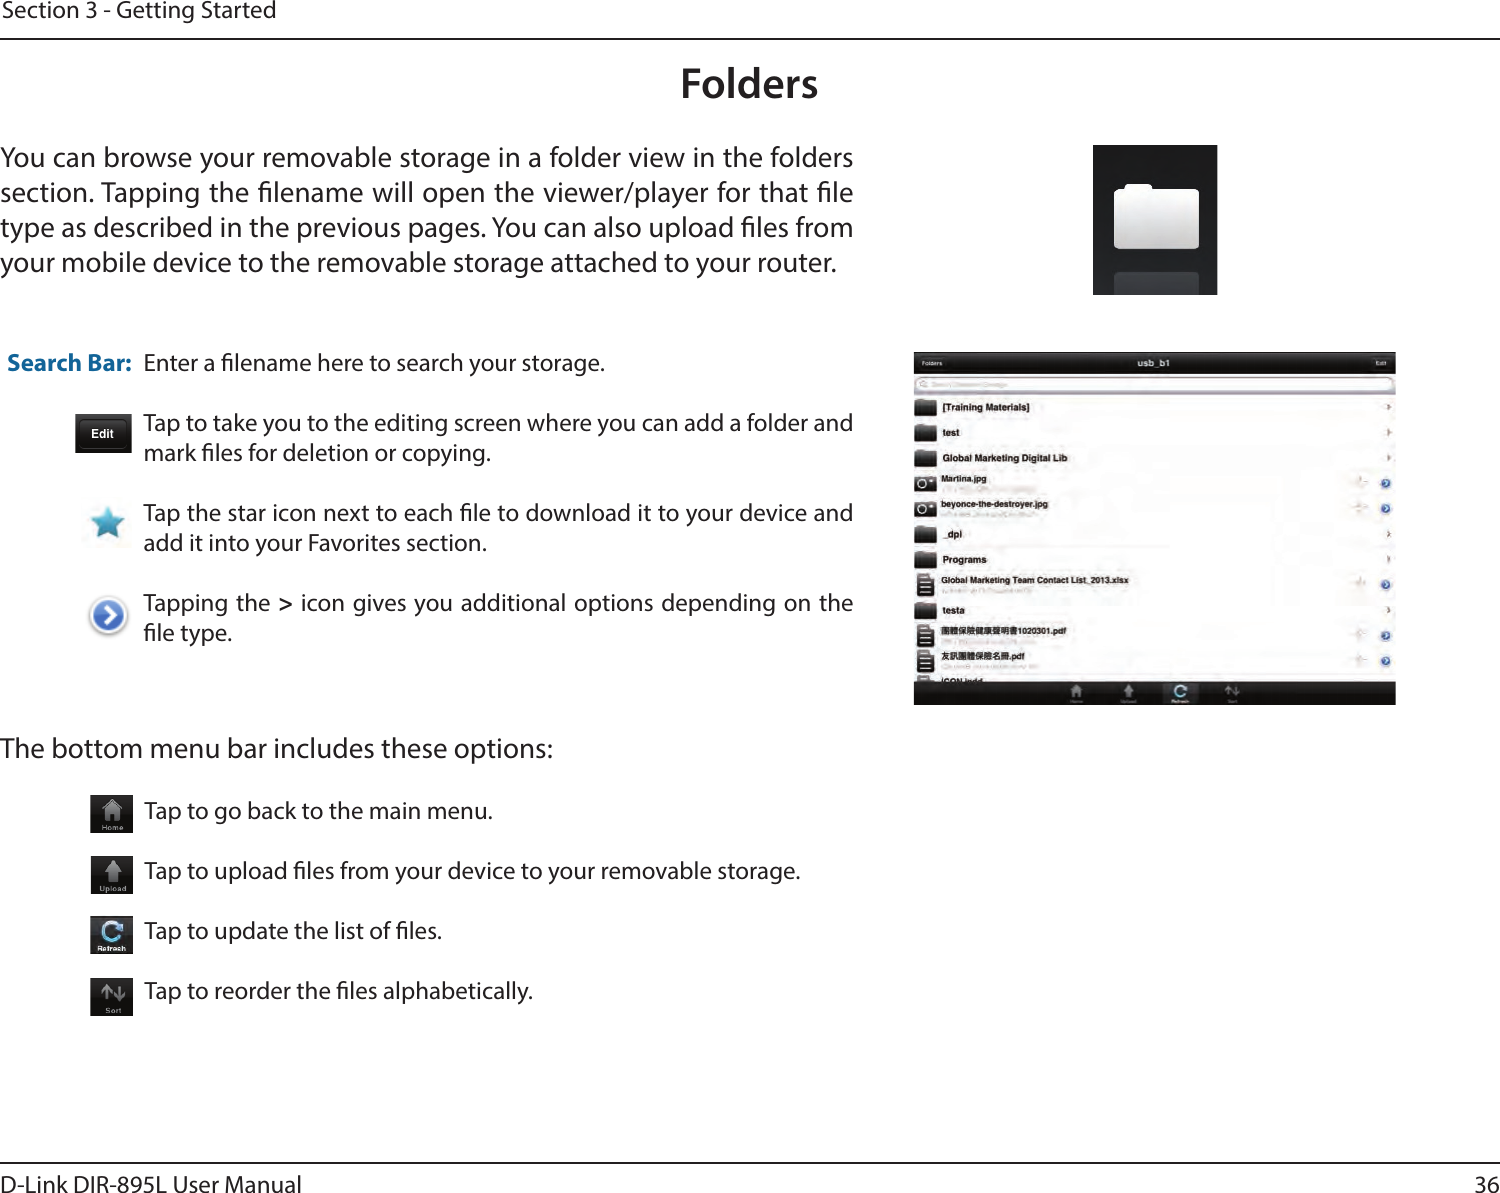 36D-Link DIR-895L User ManualSection 3 - Getting StartedFoldersYou can browse your removable storage in a folder view in the folders section. Tapping the lename will open the viewer/player for that le type as described in the previous pages. You can also upload les from your mobile device to the removable storage attached to your router.Enter a lename here to search your storage.Tap to take you to the editing screen where you can add a folder and mark les for deletion or copying.Tap the star icon next to each le to download it to your device and add it into your Favorites section.Tapping the &gt; icon gives you additional options depending on the le type.Search Bar:The bottom menu bar includes these options:Tap to go back to the main menu.Tap to upload les from your device to your removable storage.Tap to update the list of les.Tap to reorder the les alphabetically.